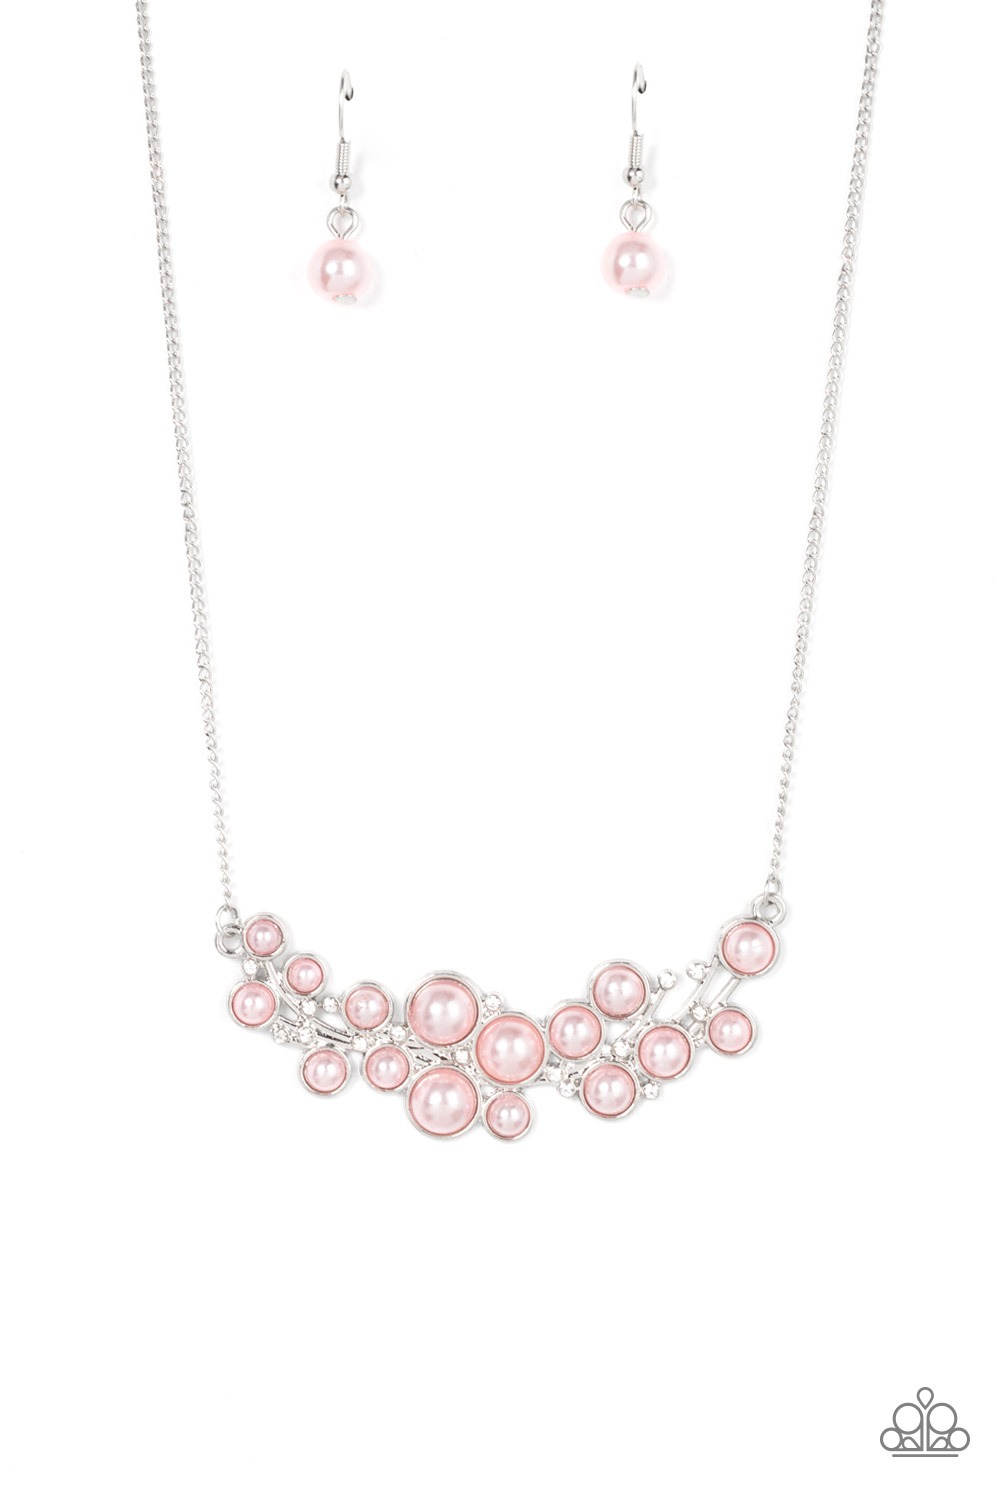 Necklace - My Yacht or Yours? - Pink